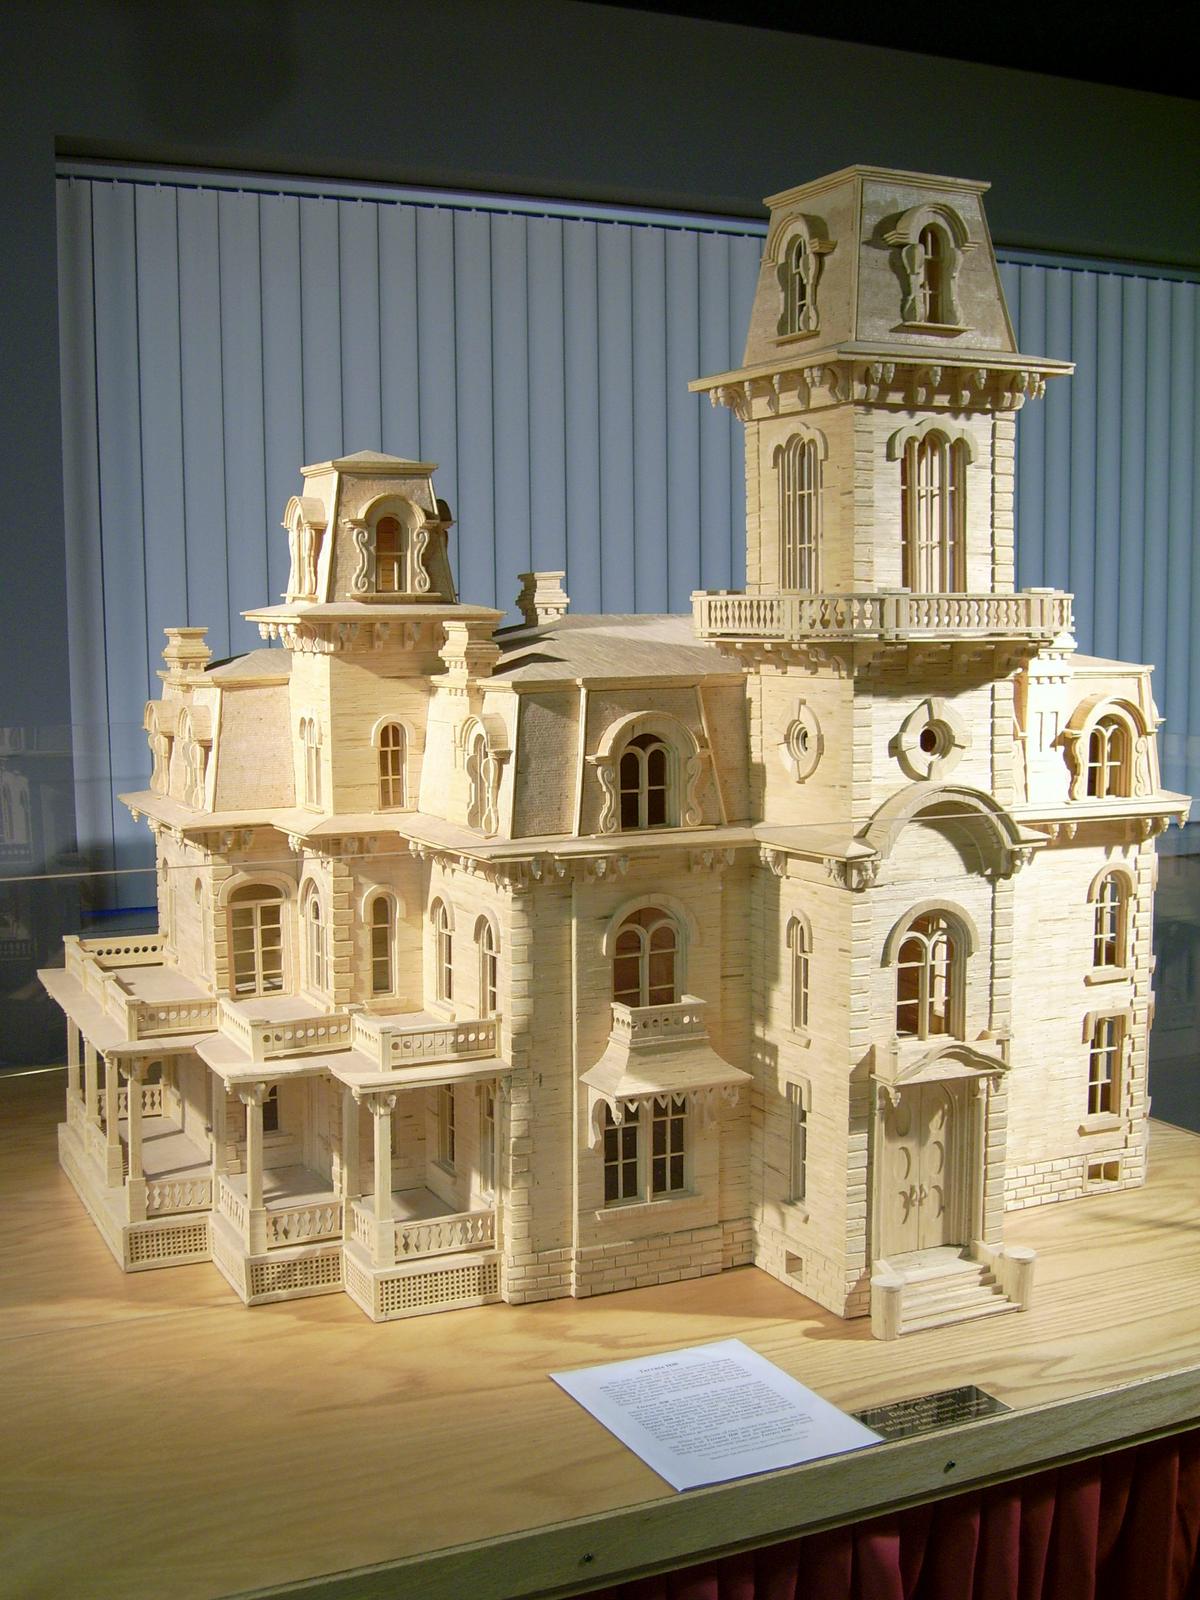 A model of the Governor's mansion in Terrace Hill, Iowa, made of 193,000 matchsticks, completed in 1996. (Courtesy of Patrick Acton)